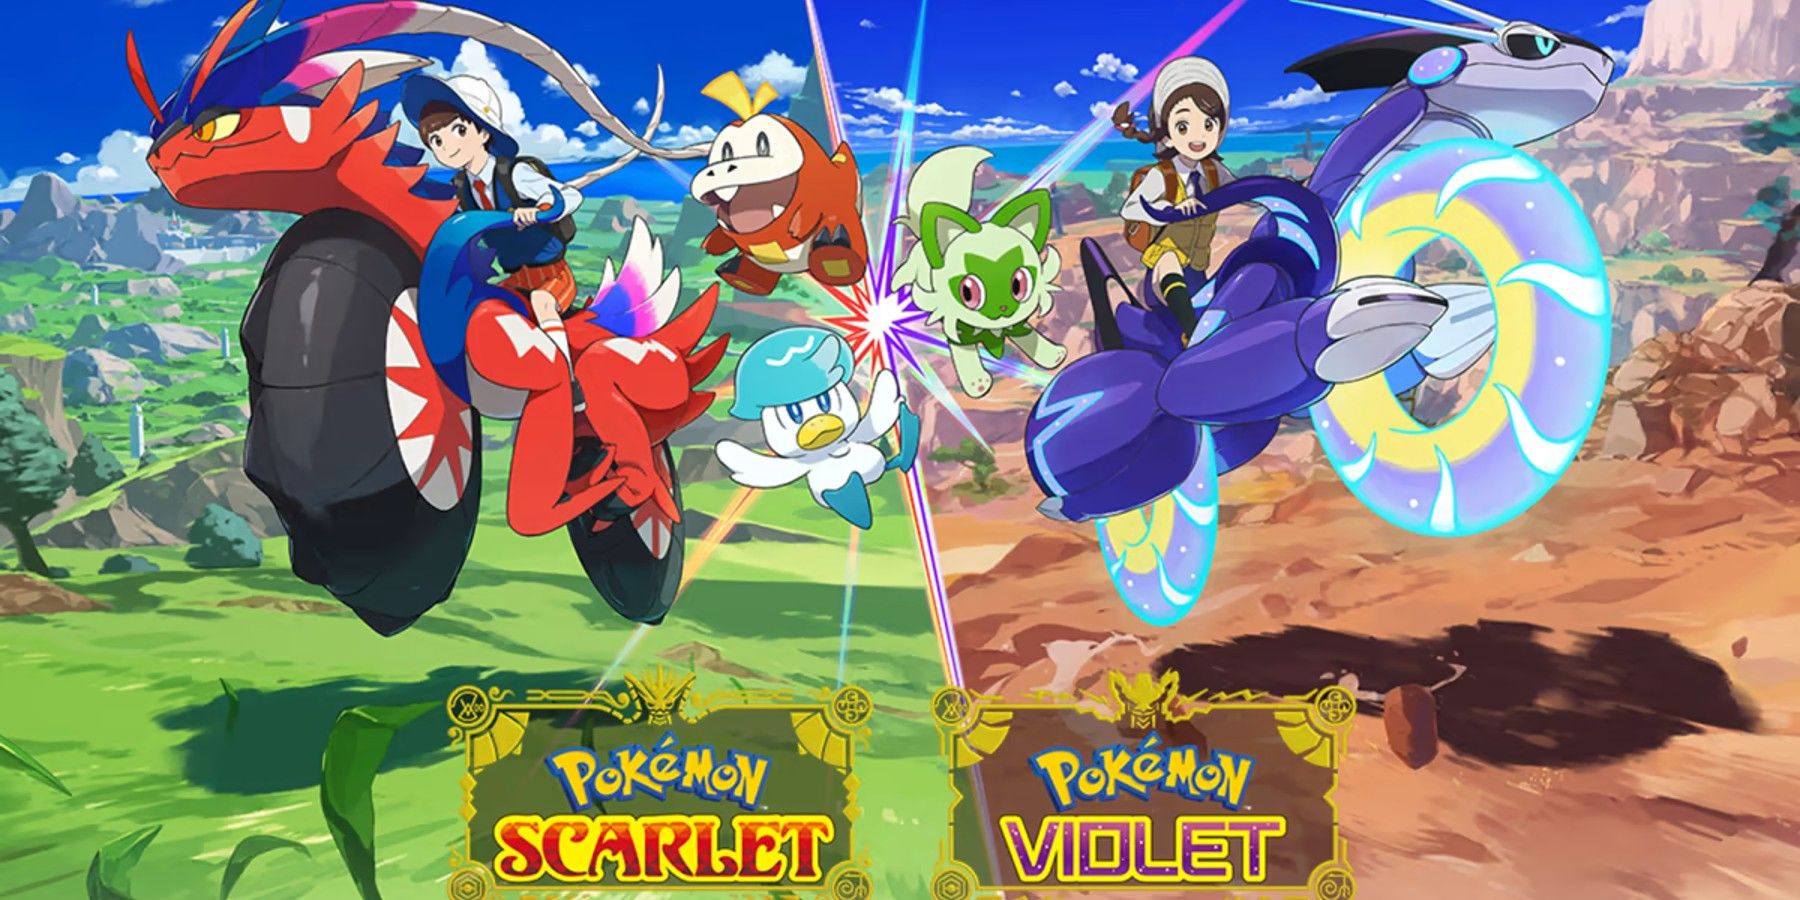 Pokémon Violet Is Now the Lowest Rated Main Pokémon Game on Metacritic -  Gameranx